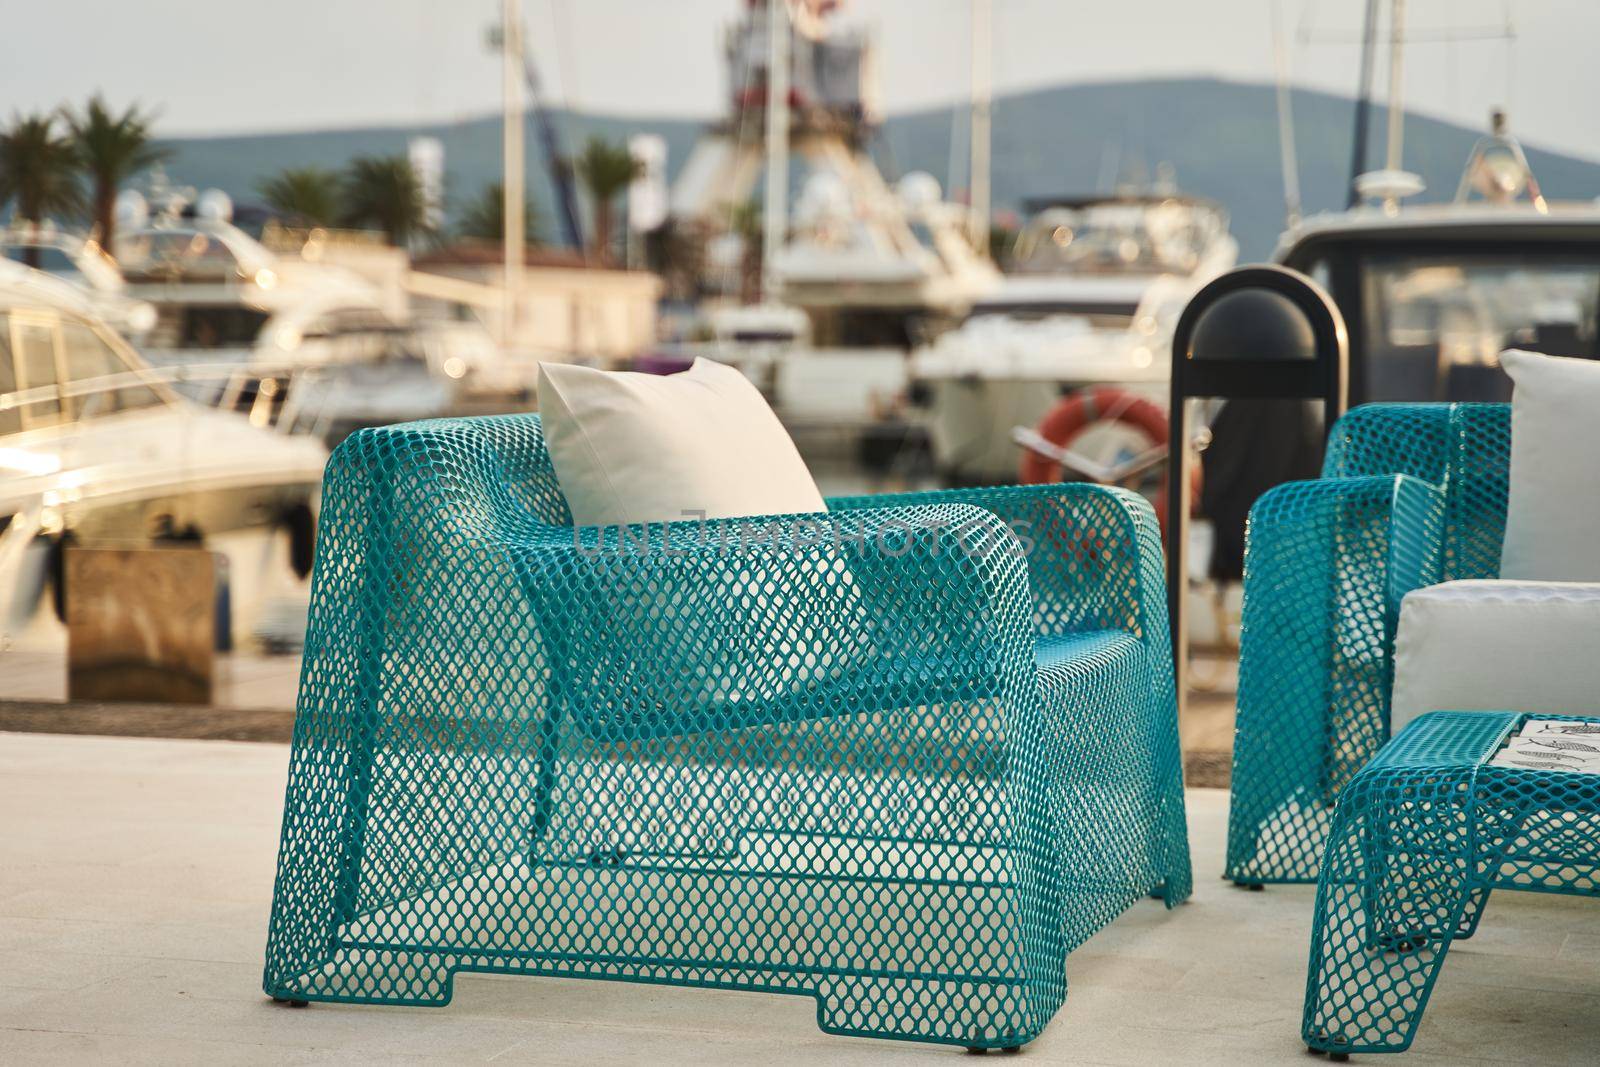 Wicker blue chairs and a table. Summer outdoor furniture on the seashore by driver-s